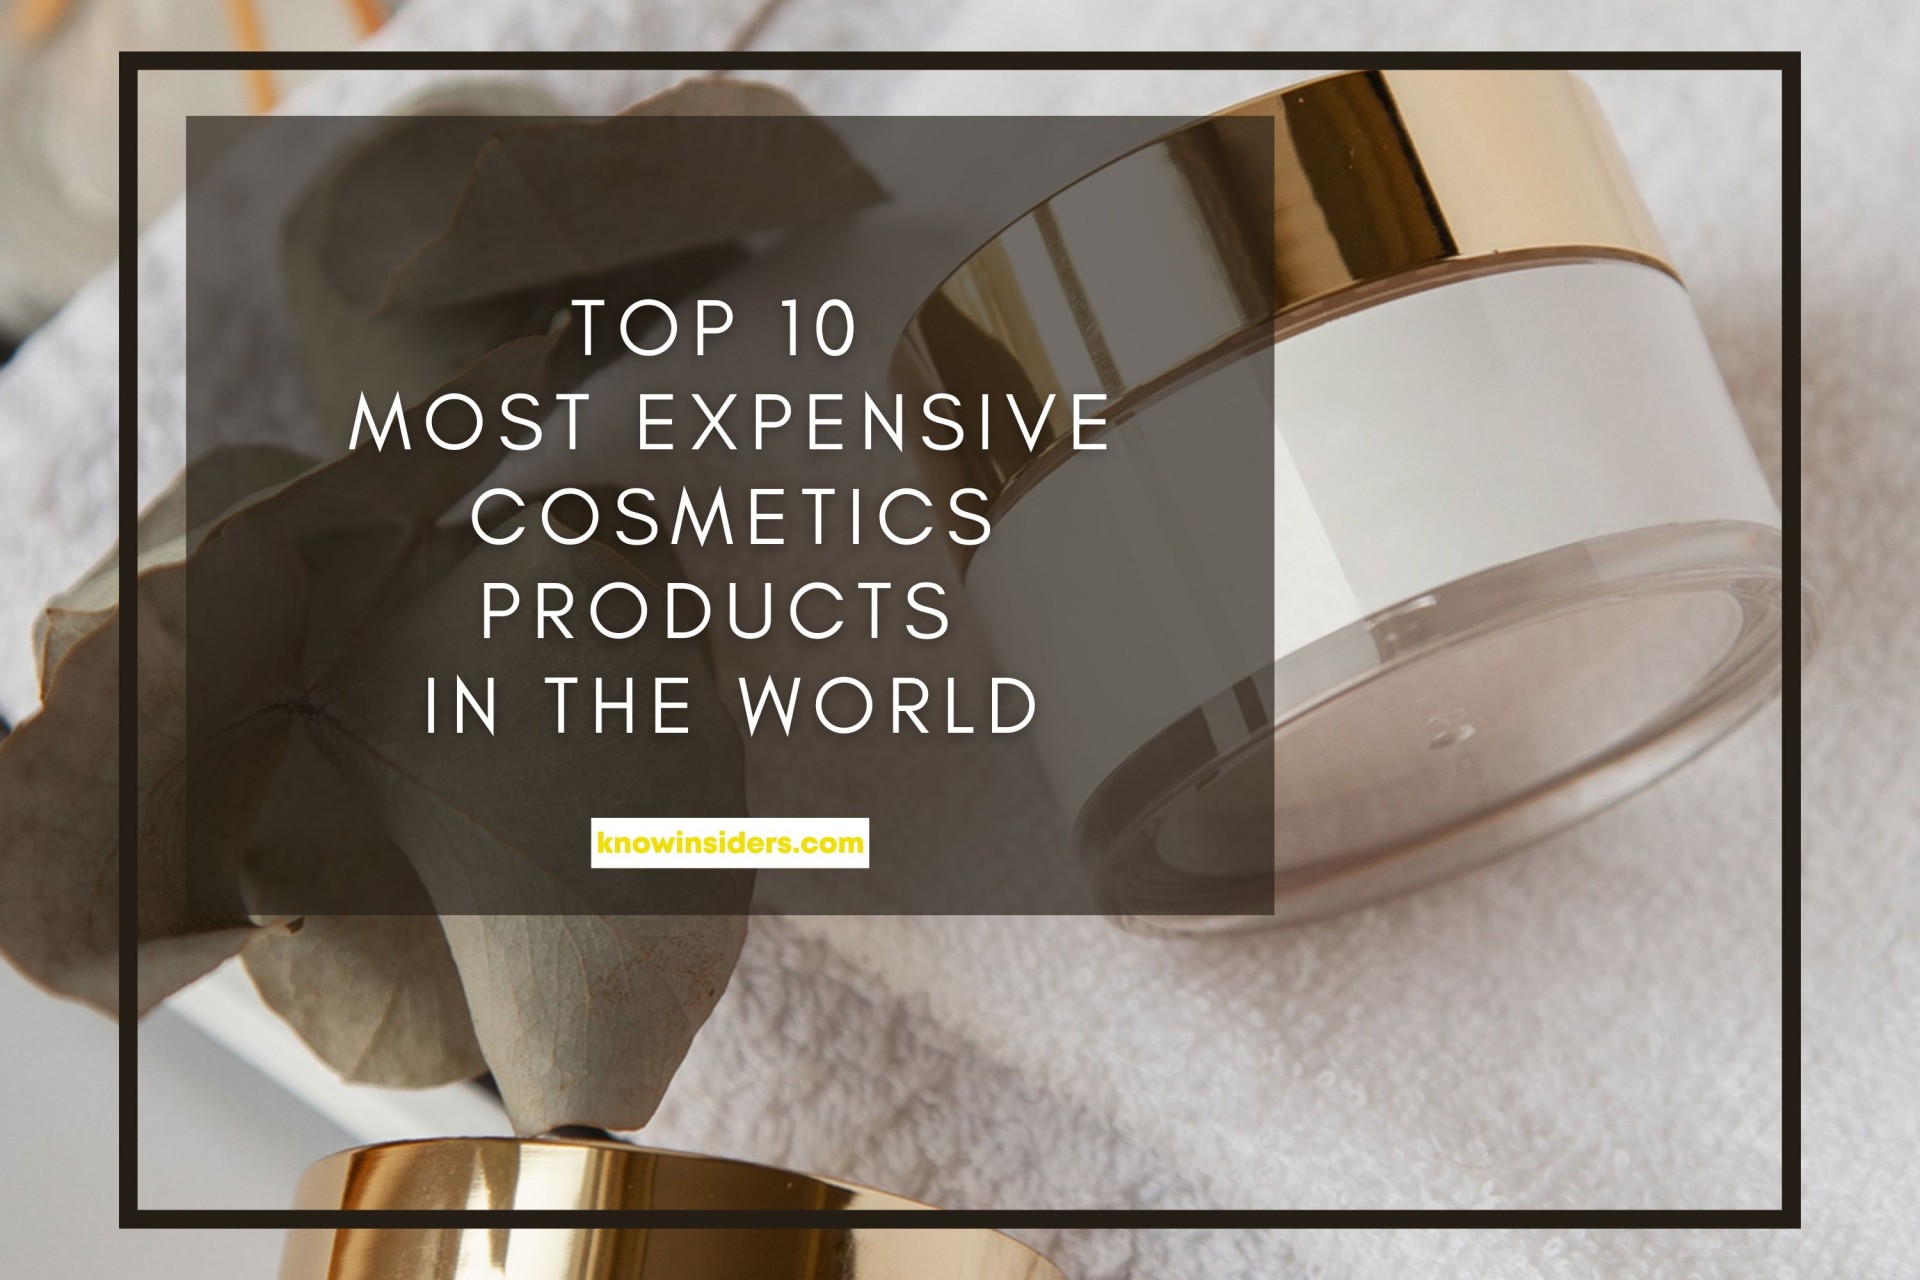 Top 10 Most Expensive Cosmetics Products In The World